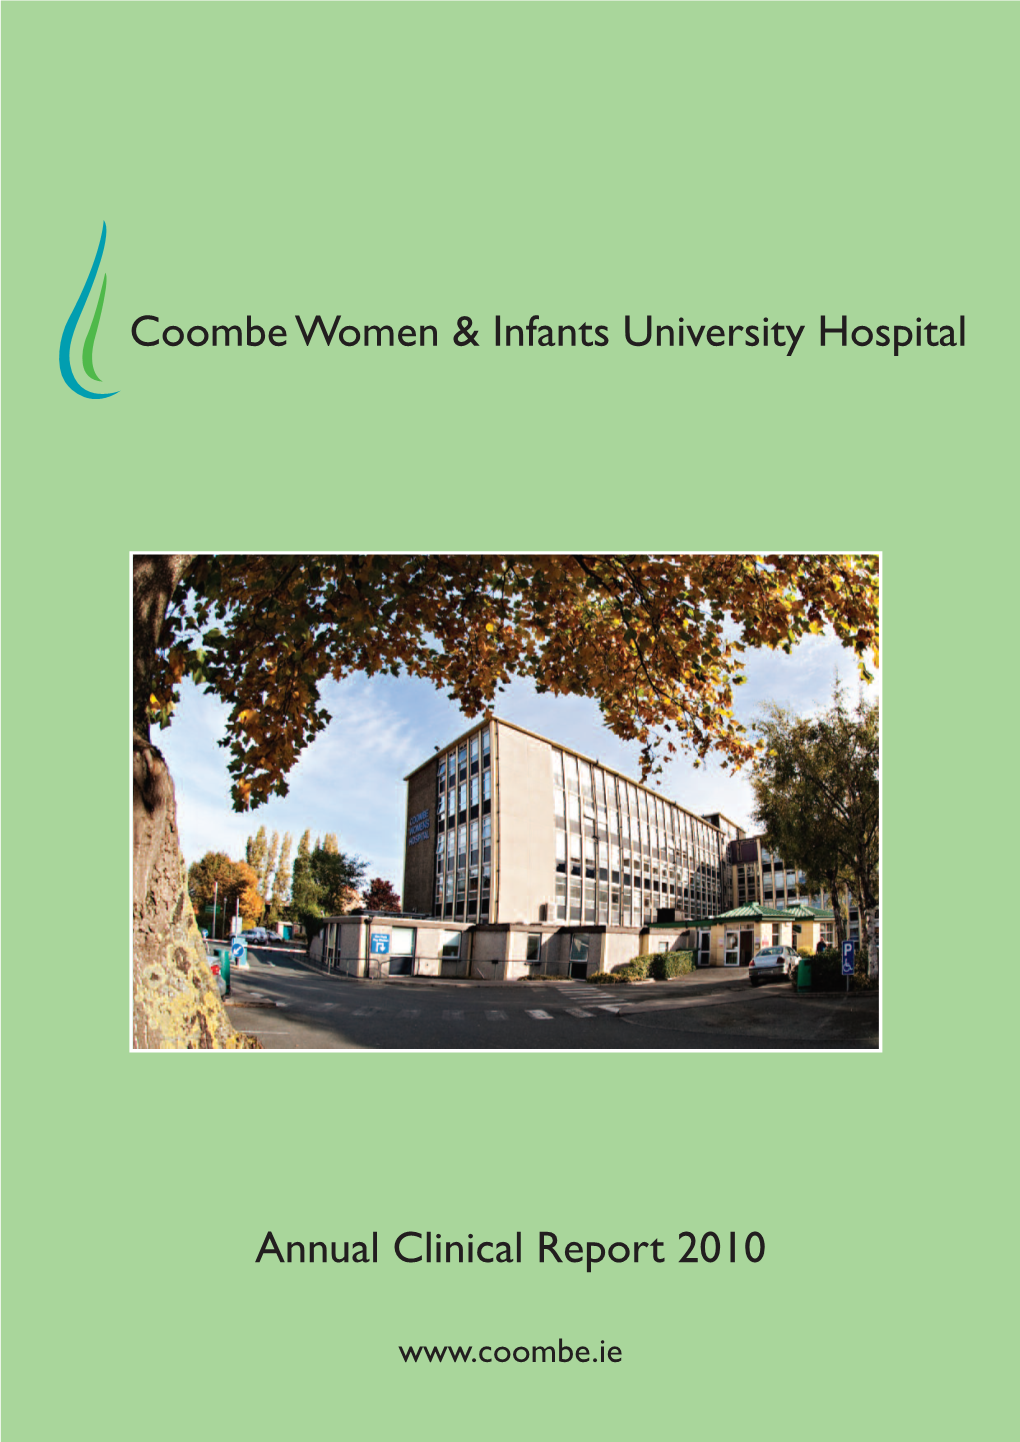 Annual Clinical Report 2010 Coombe Women & Infants University Hospital